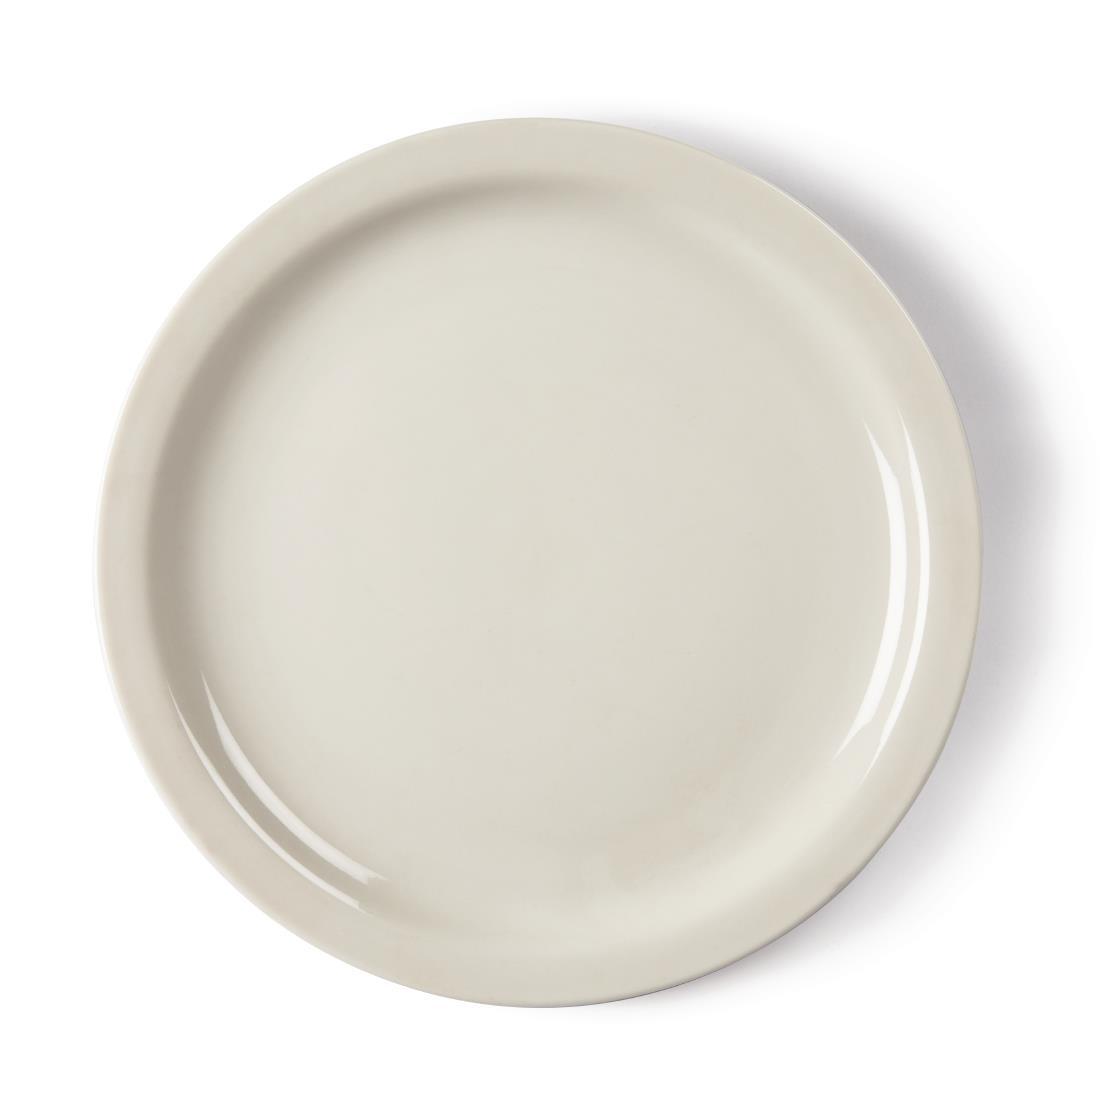 Olympia Ivory Narrow Rimmed Plates 255mm (Pack of 12) - U844  - 3